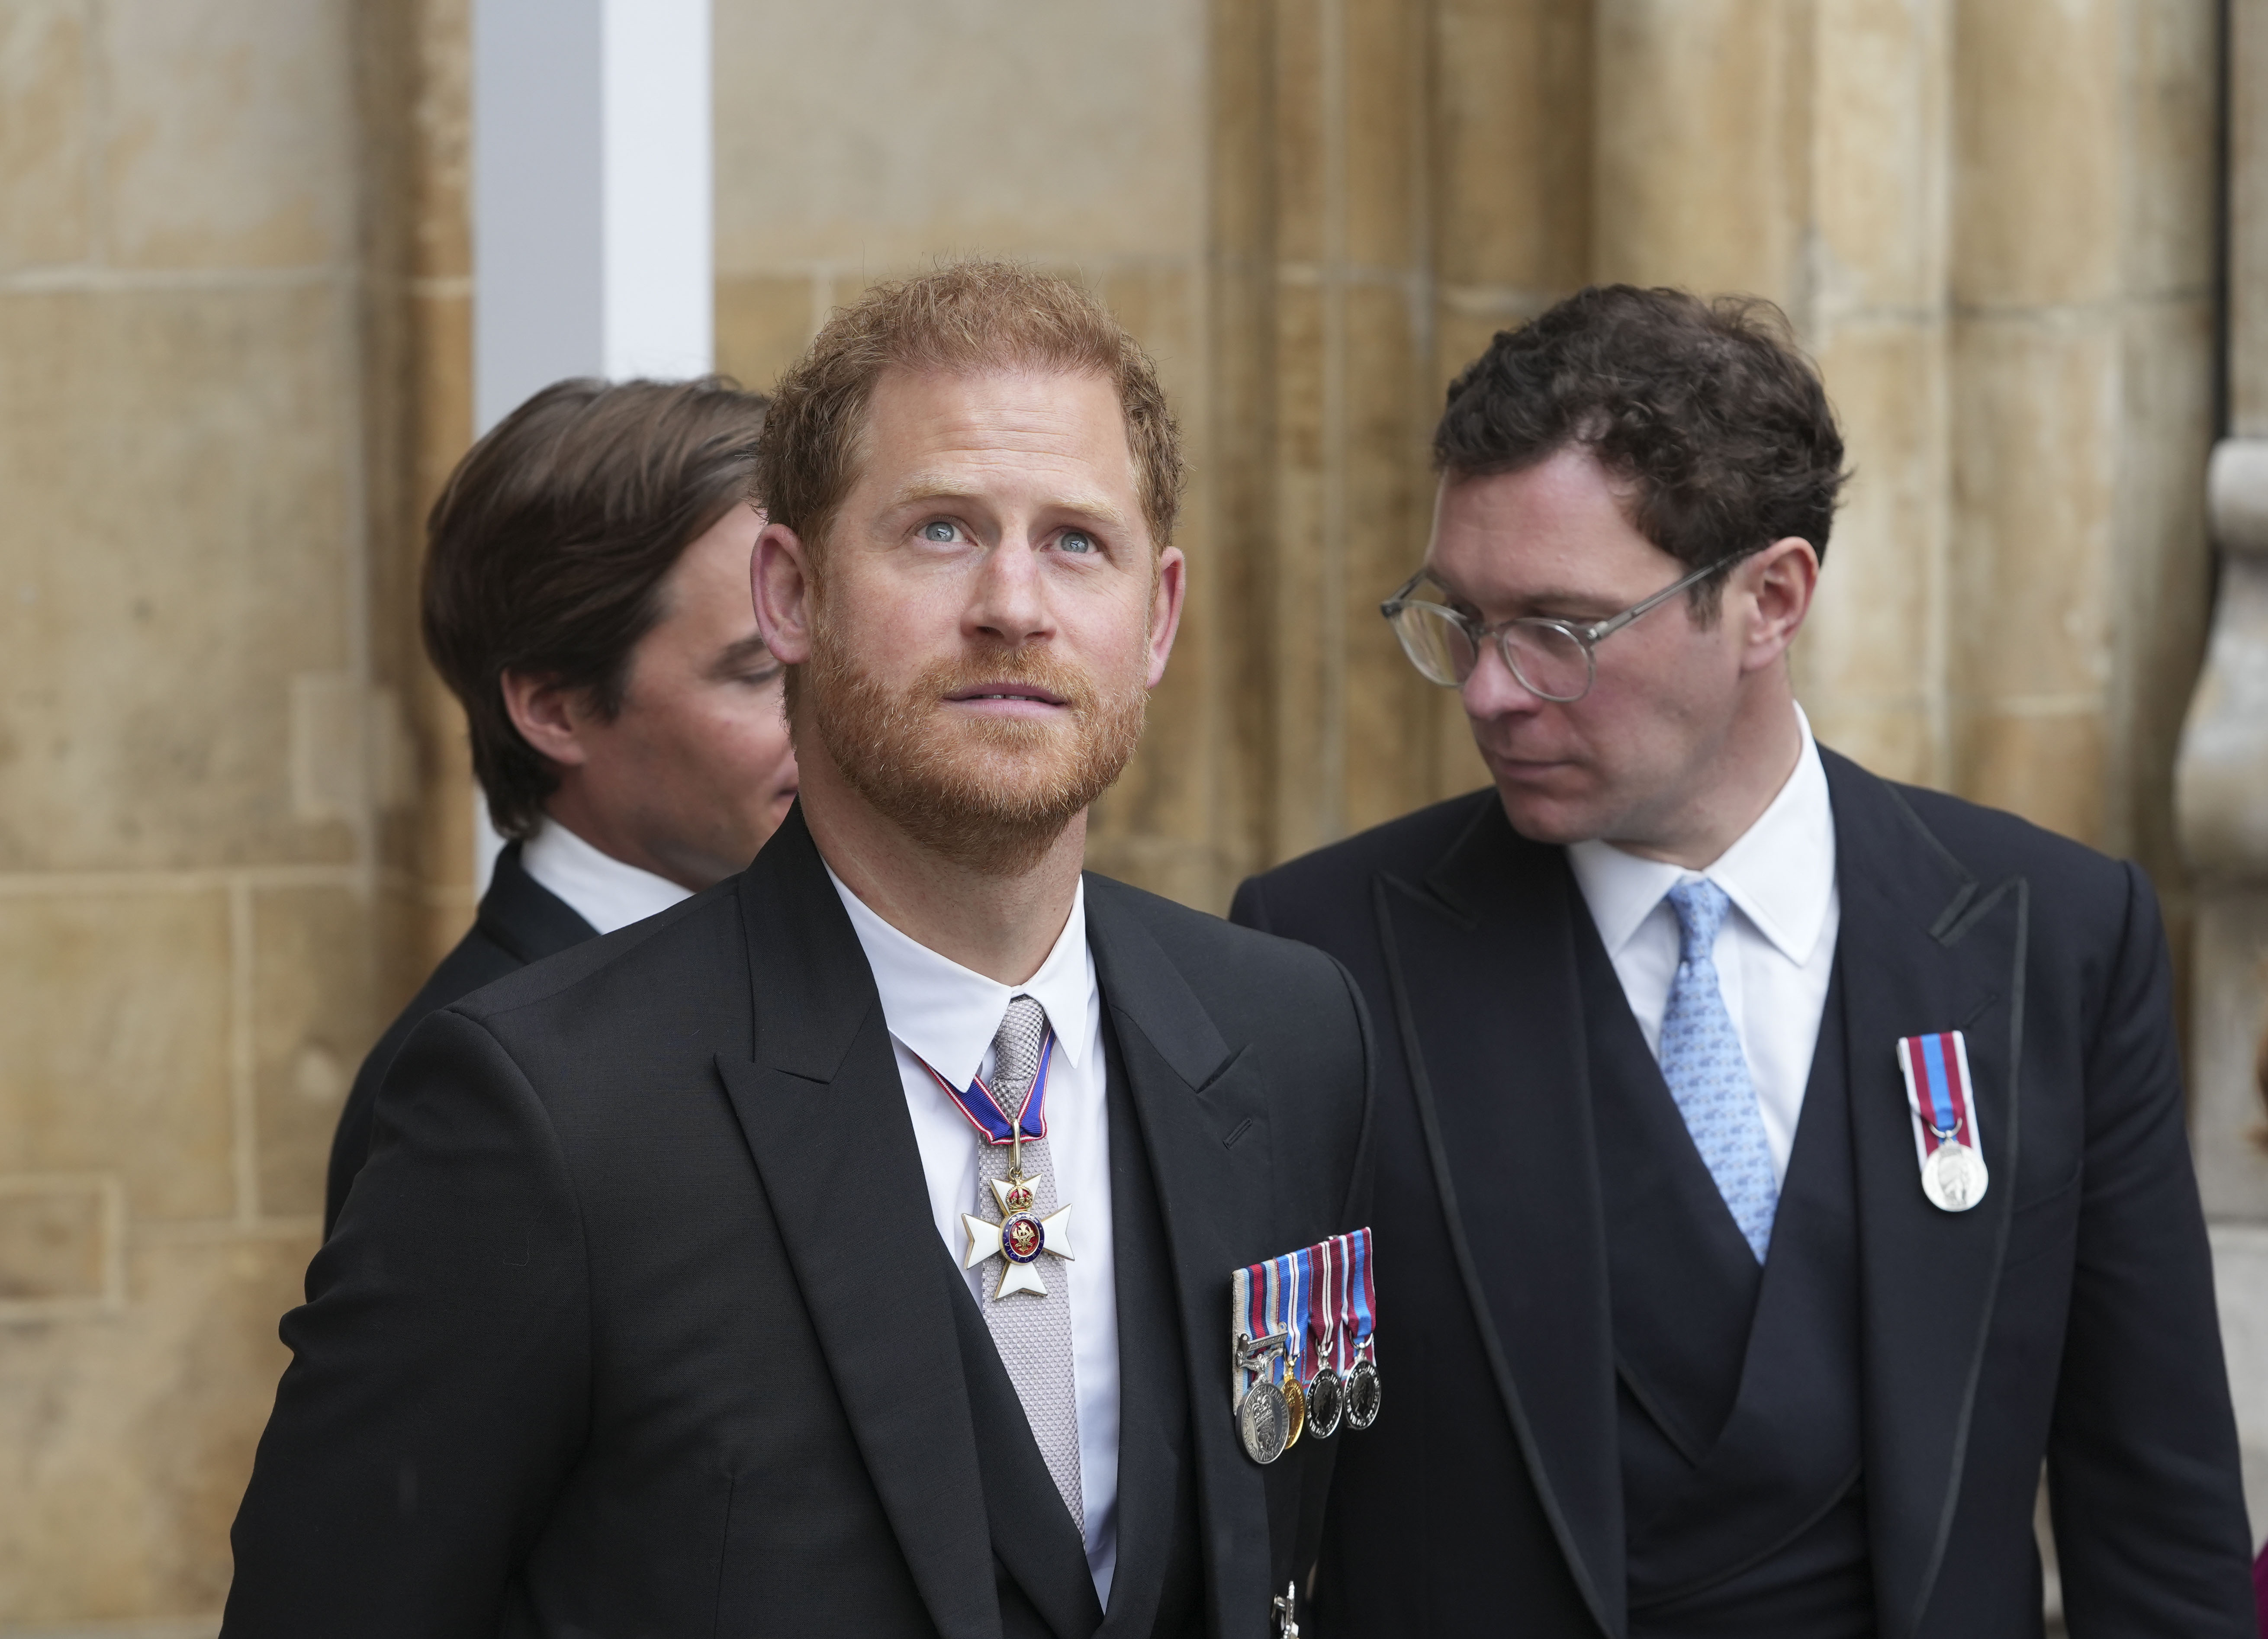 Prince Harry, Duke of Sussex and Jack Brooksbank attend the Coronation of King Charles III and Queen Camilla on May 6, 2023 in London, England | Source: Getty Images